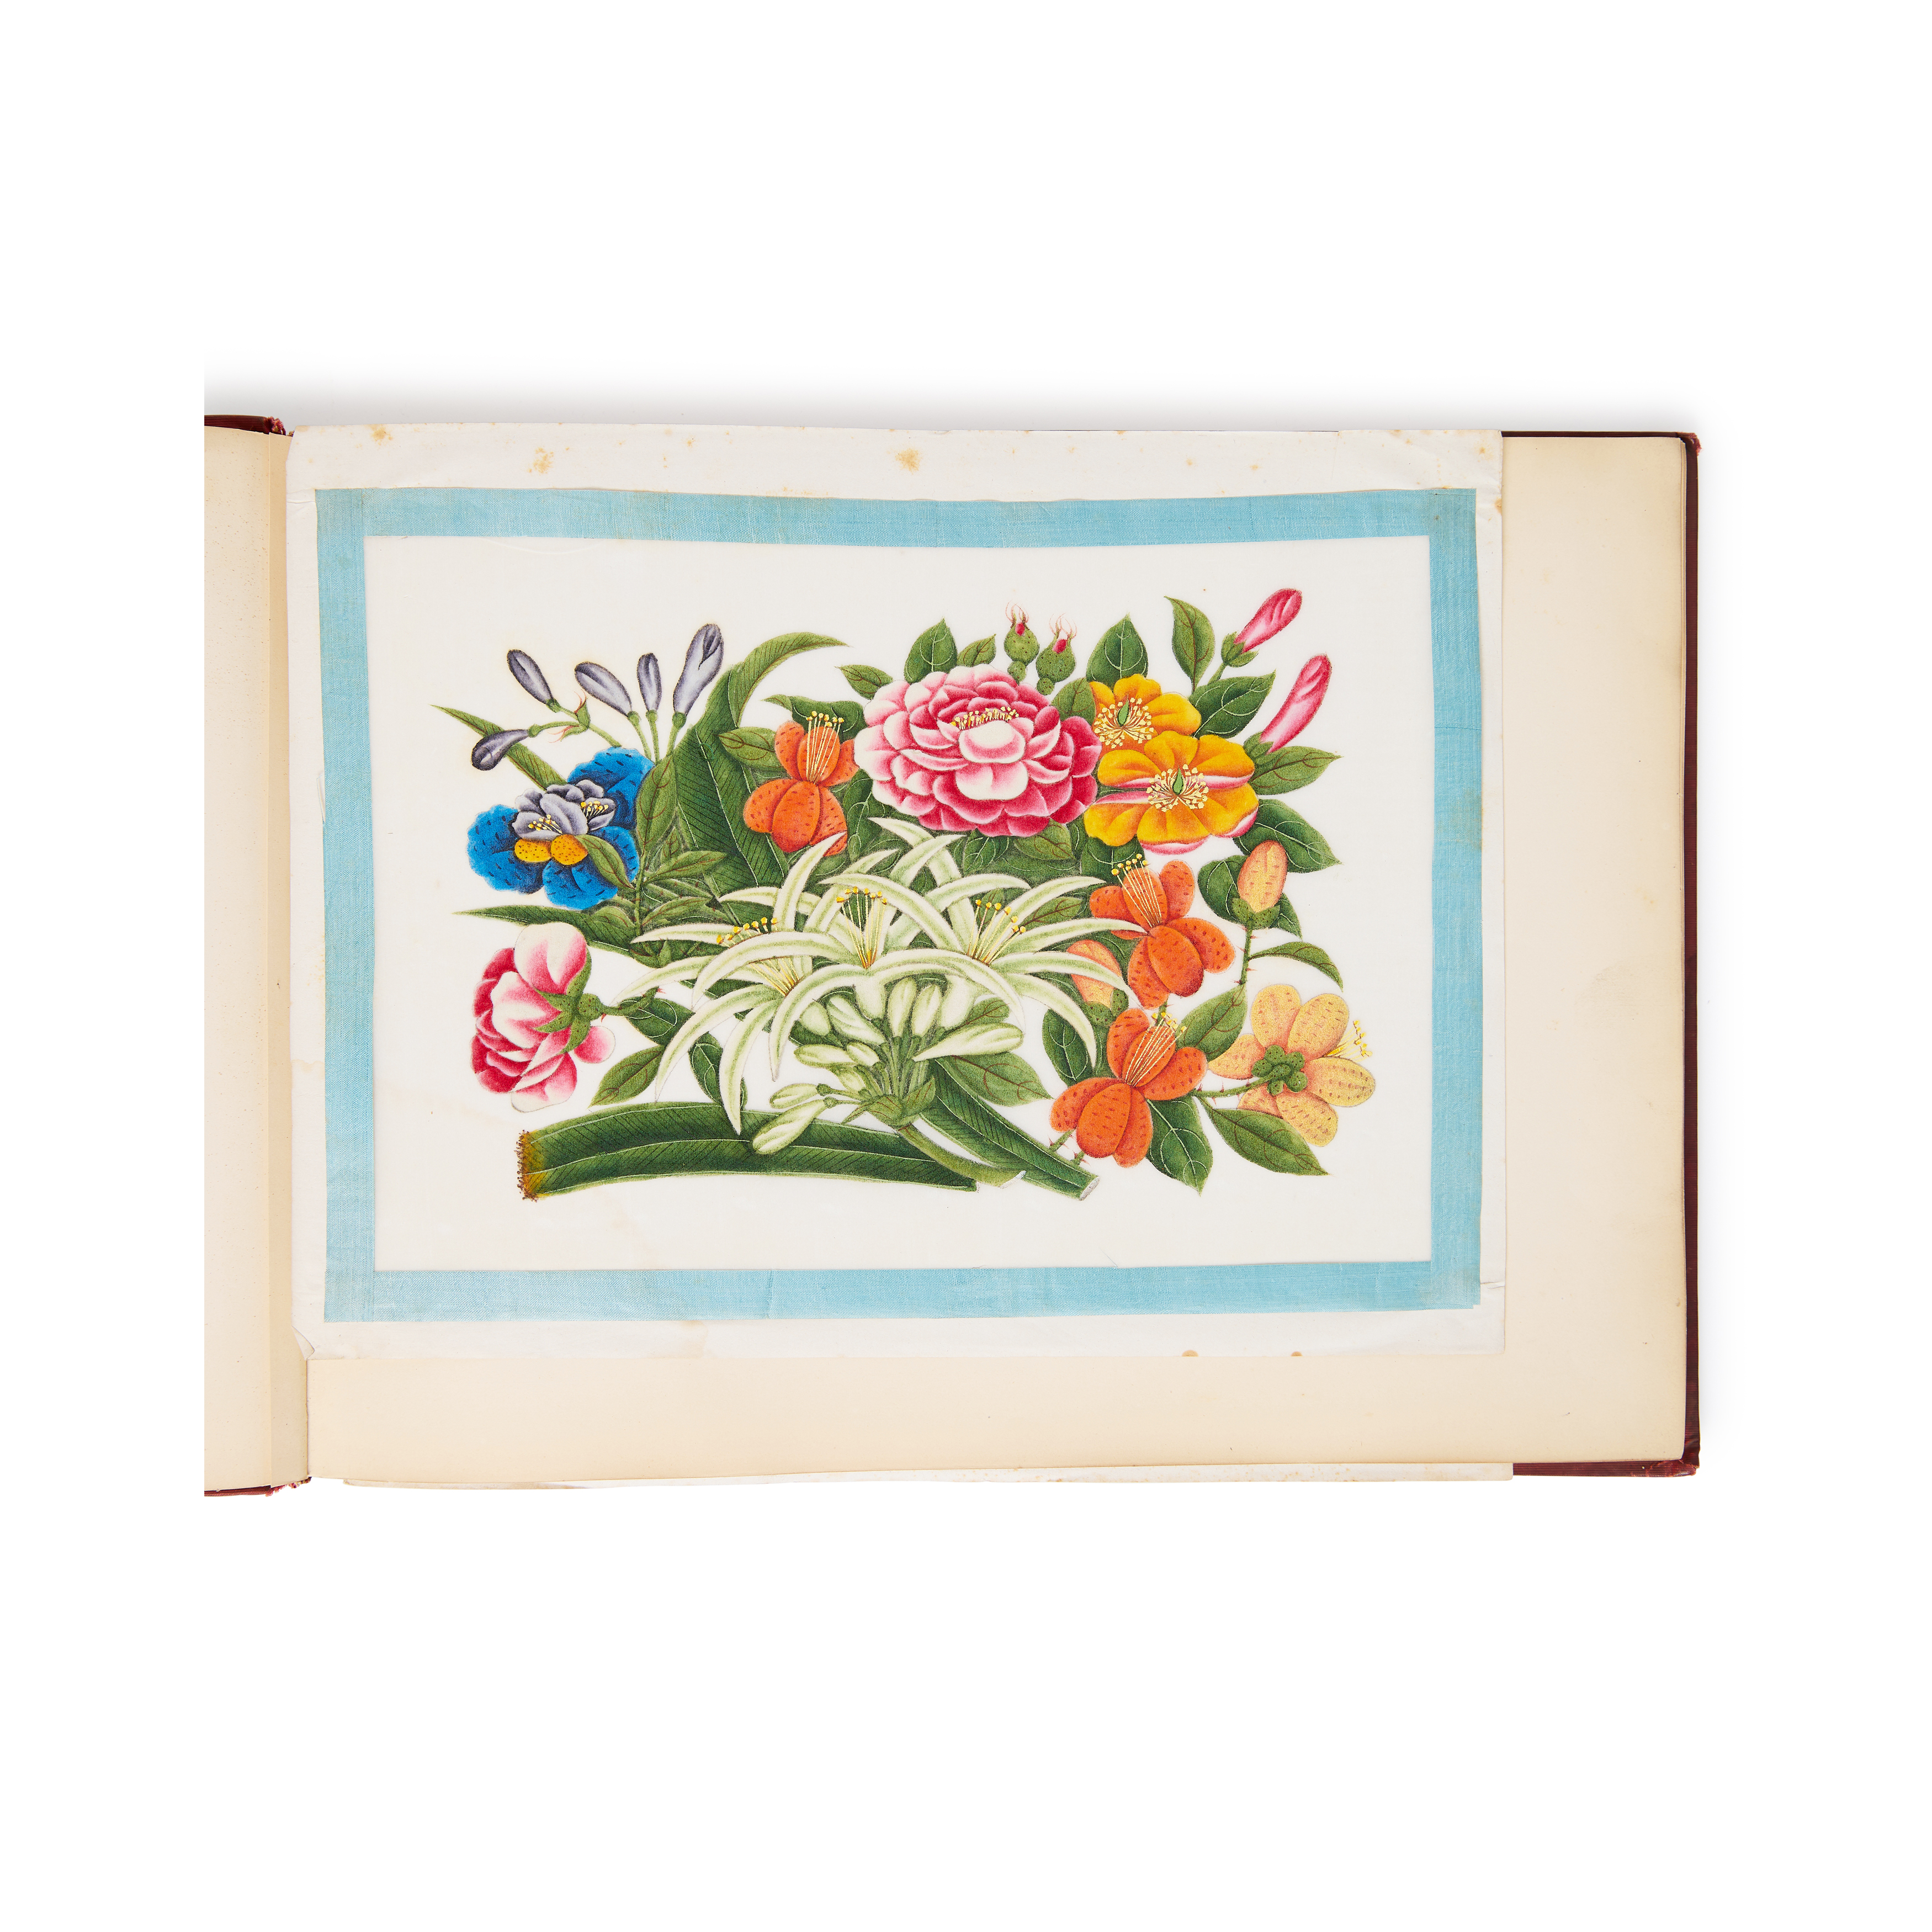 Chinese Guangdong (Canton) Export School, mid-19th century 'Flowers', 'fruit', 'fish' and 'tortu... - Image 3 of 5